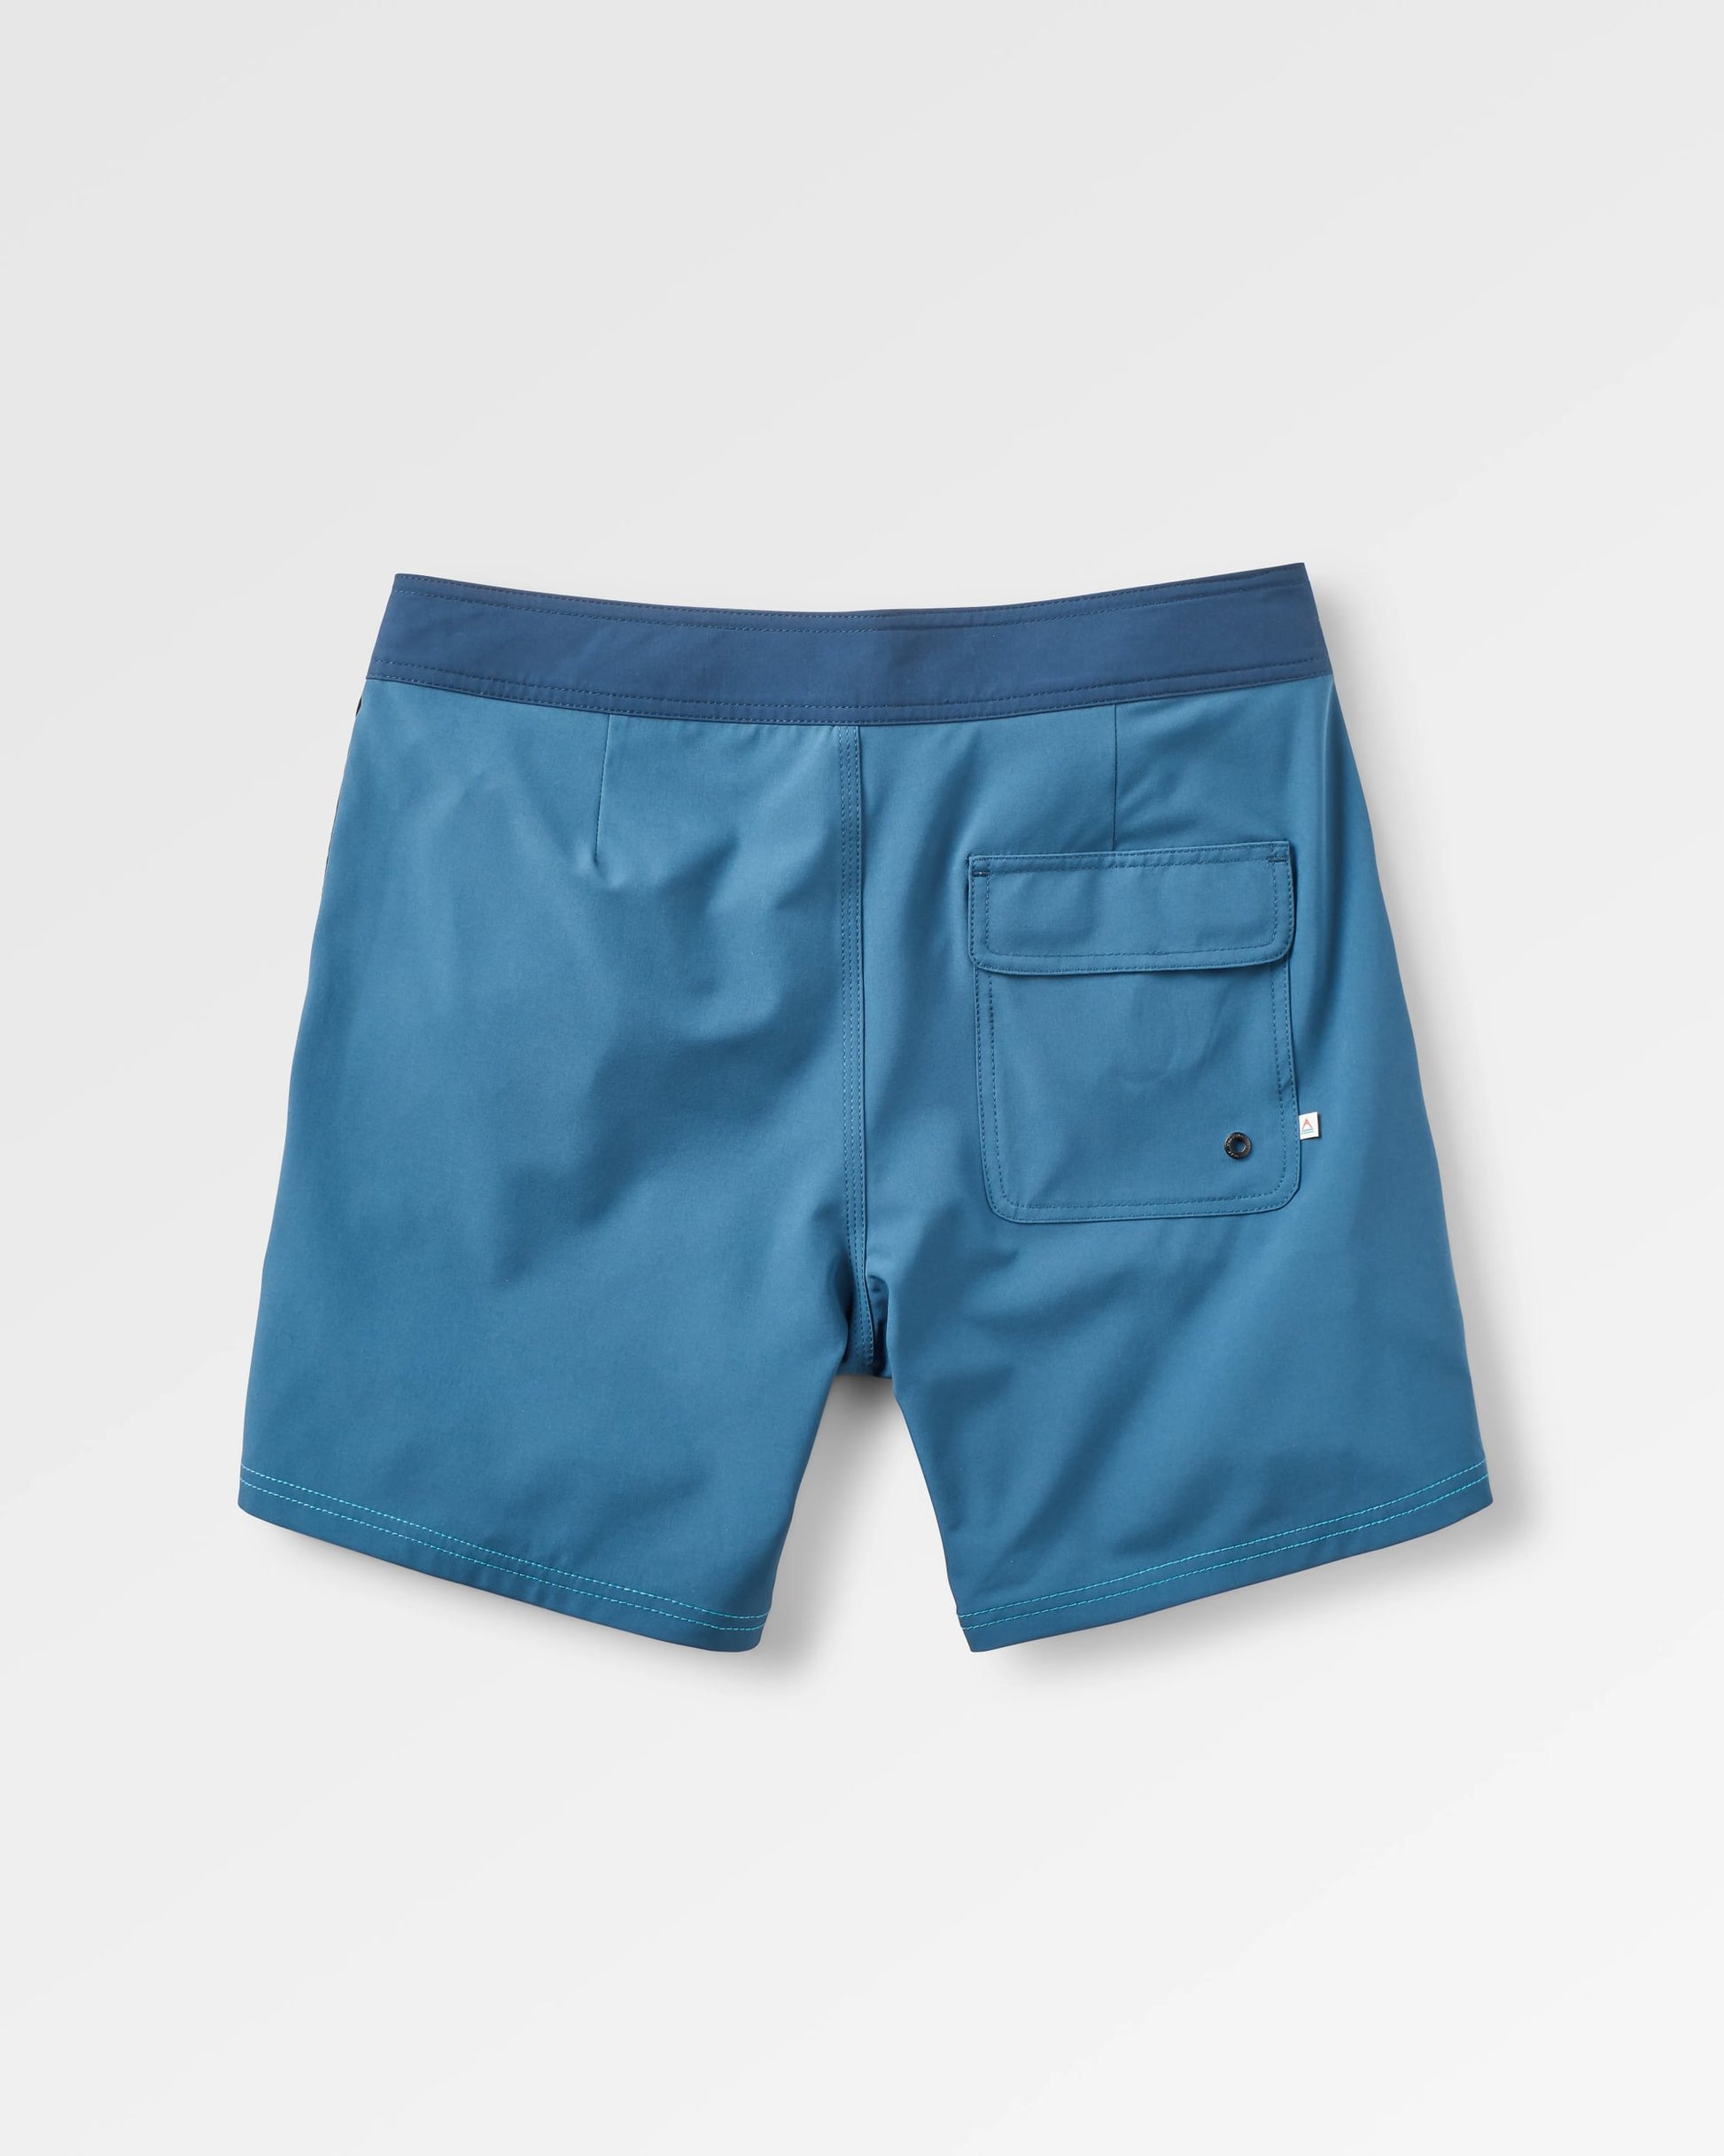 Hollow Recycled Boardshort - Blue Pool